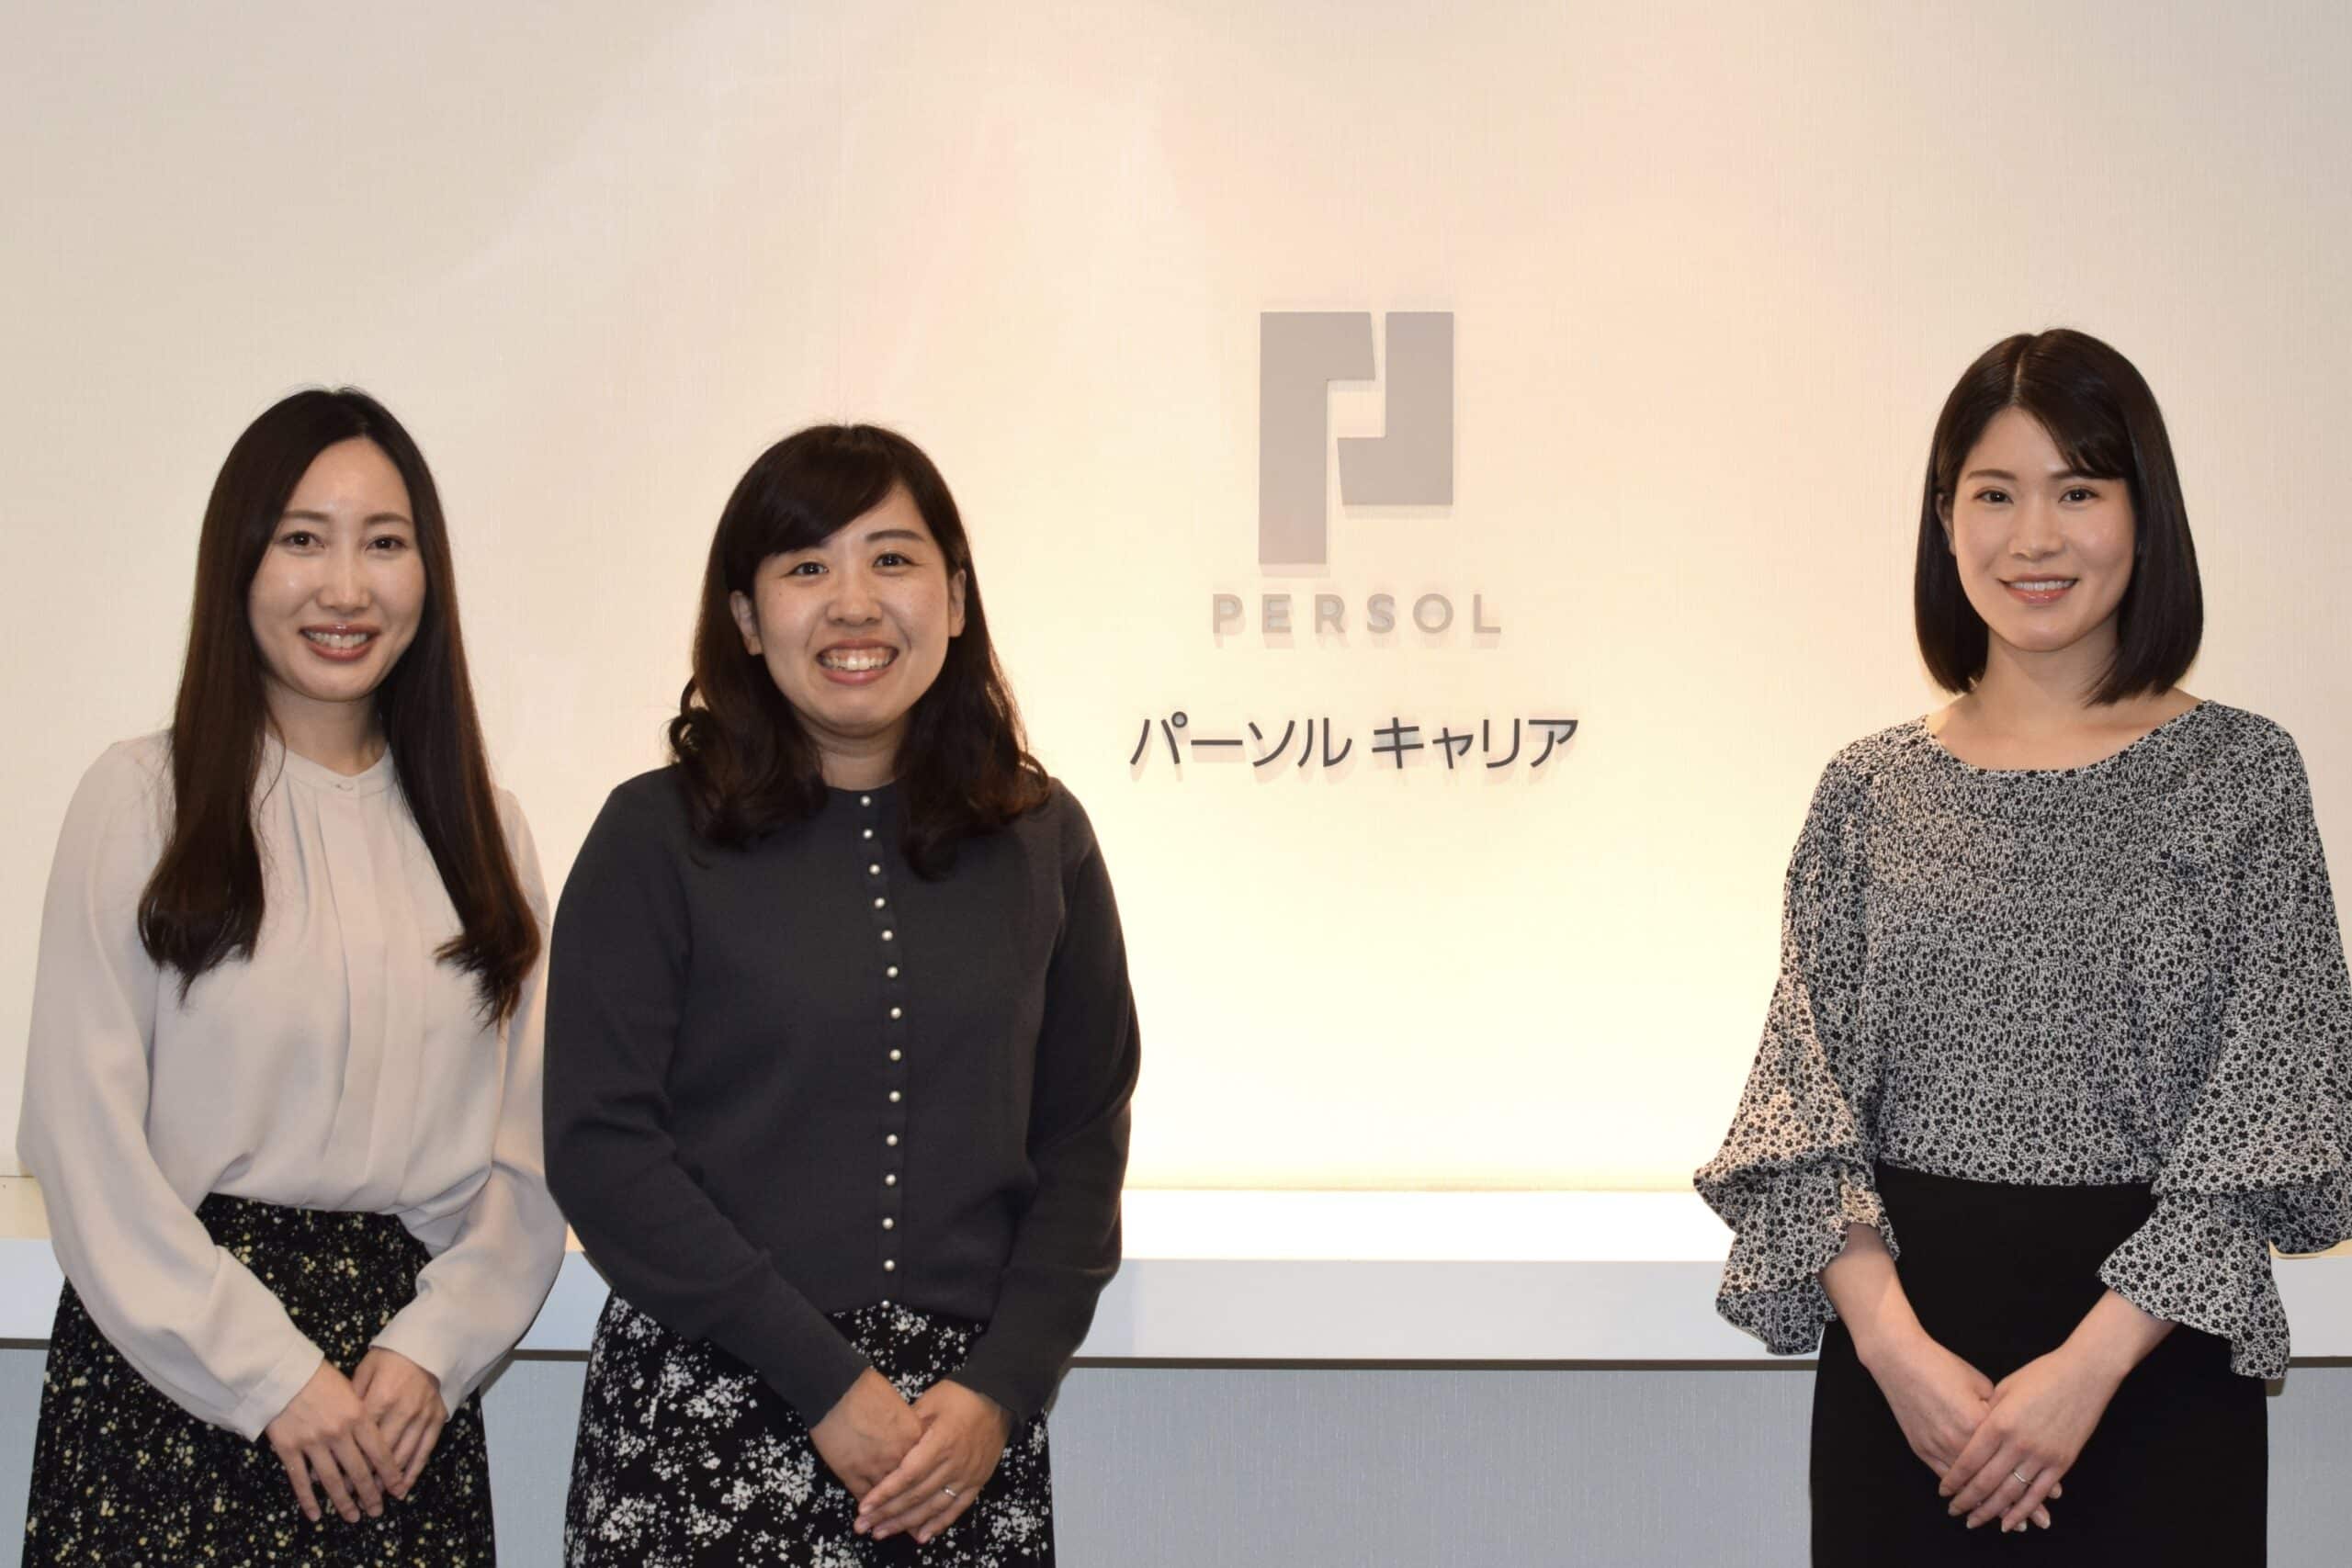 Persol Career Human Resources